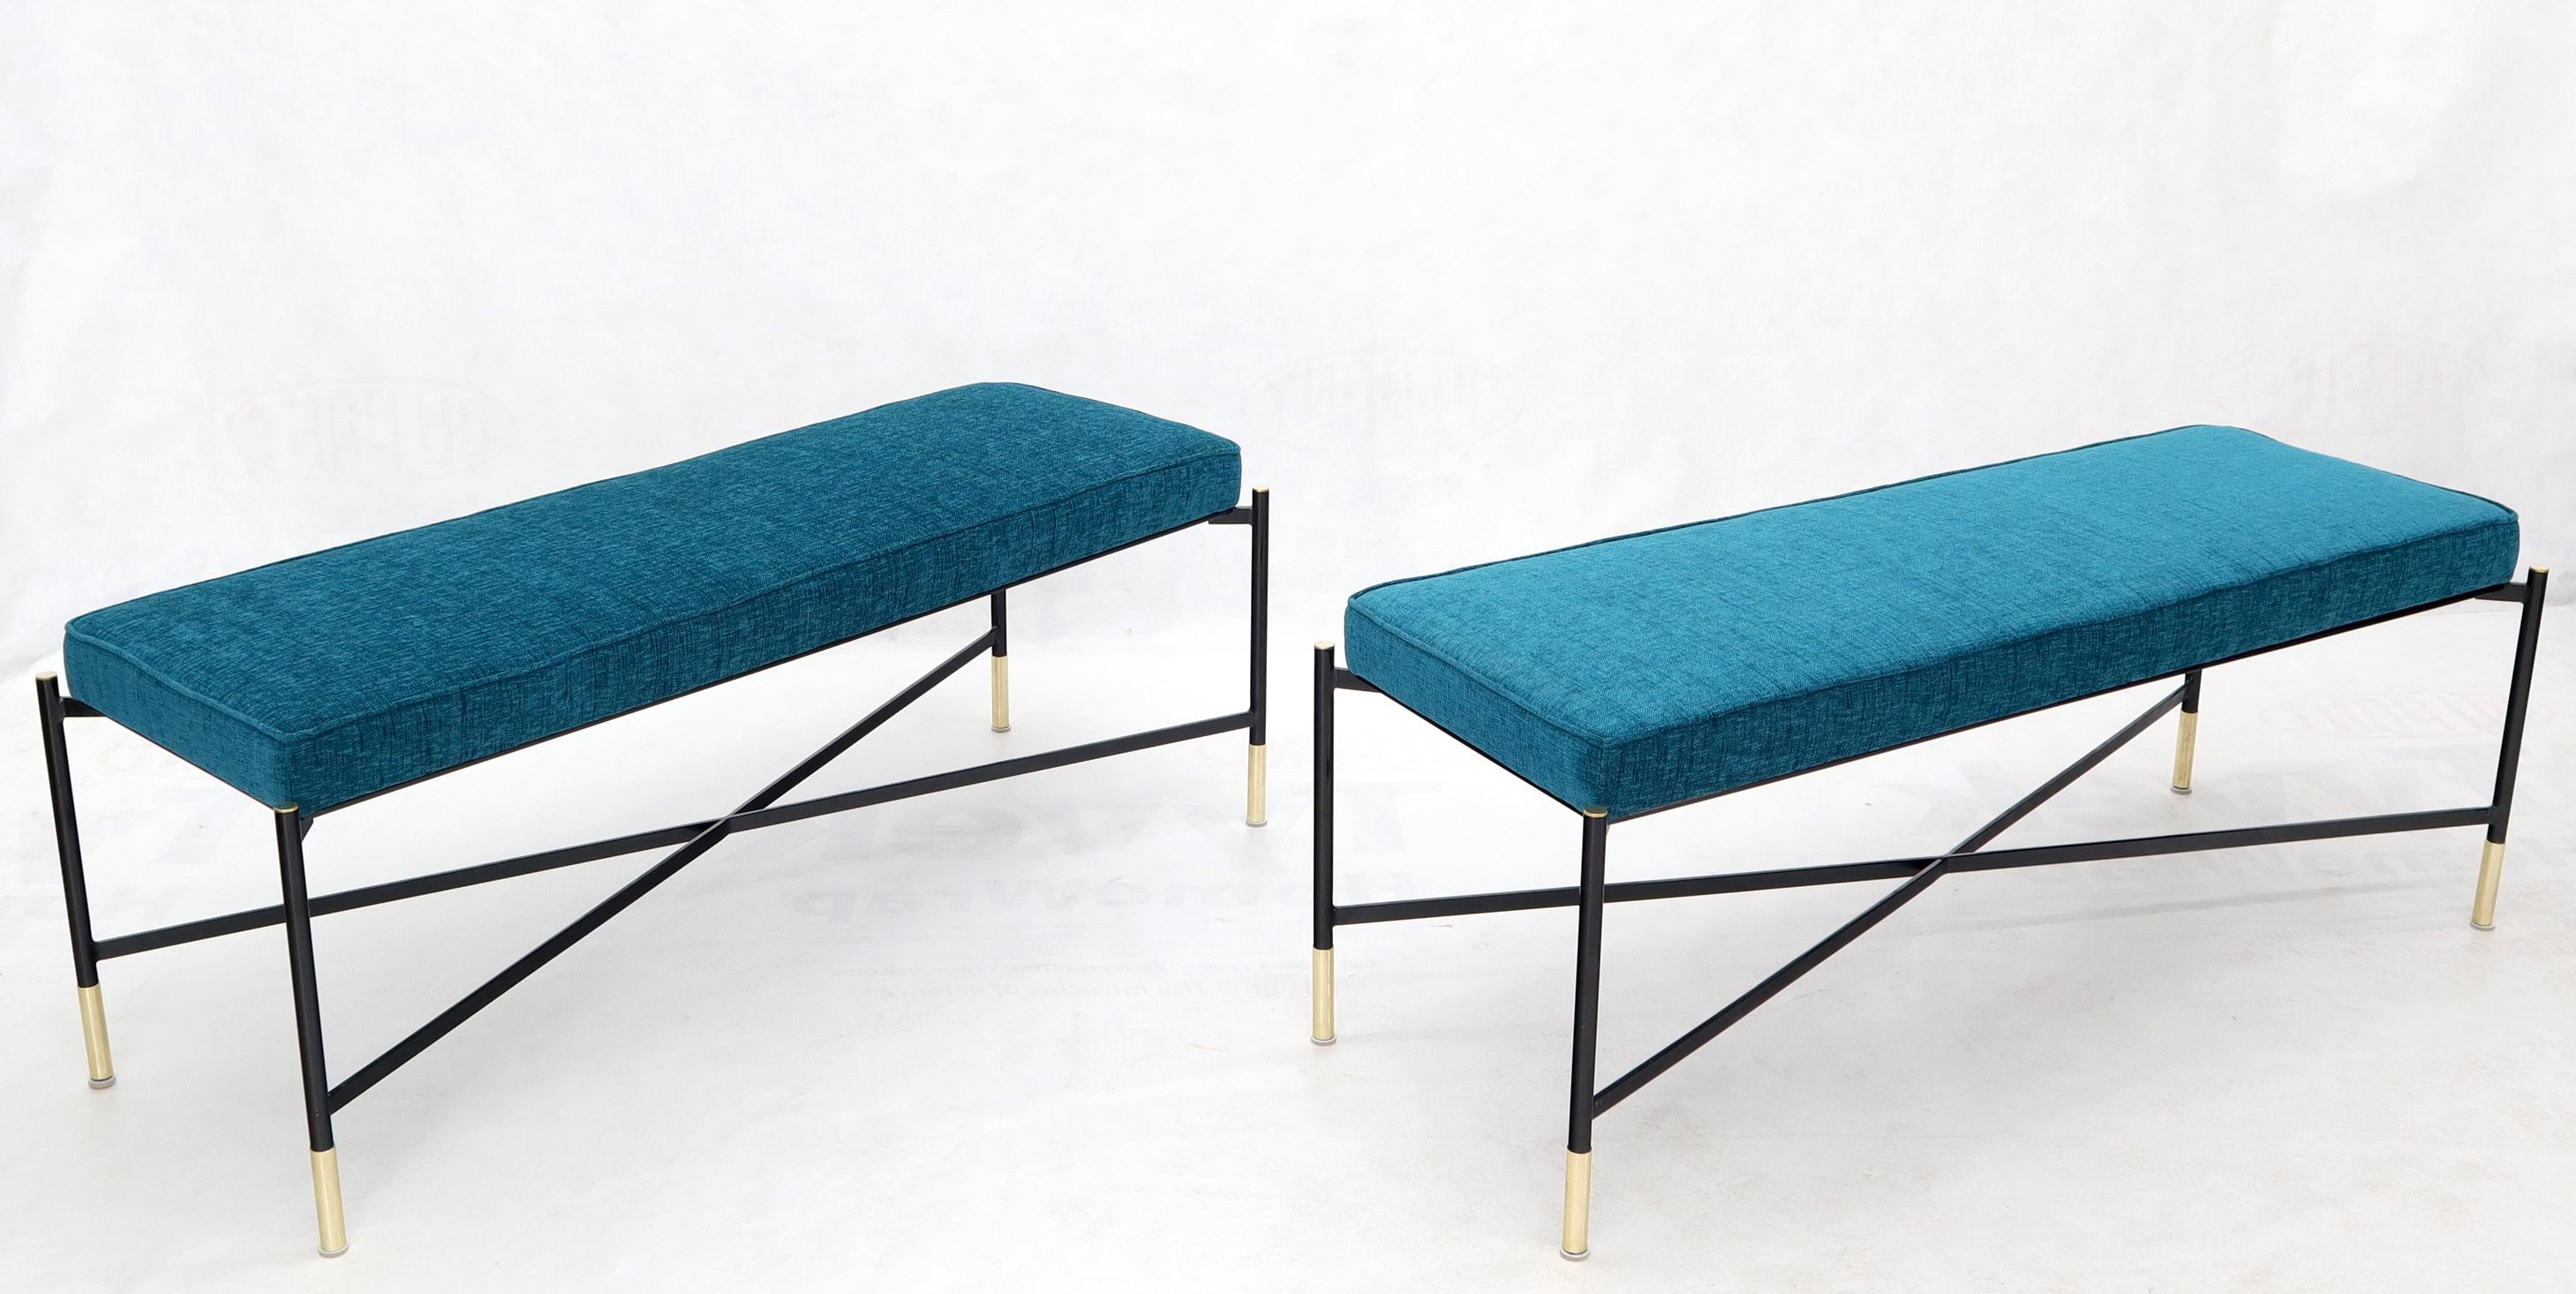 Pair of new upholstery Italian Mid-Century Modern benches on X-stretcher bases and brass tips.